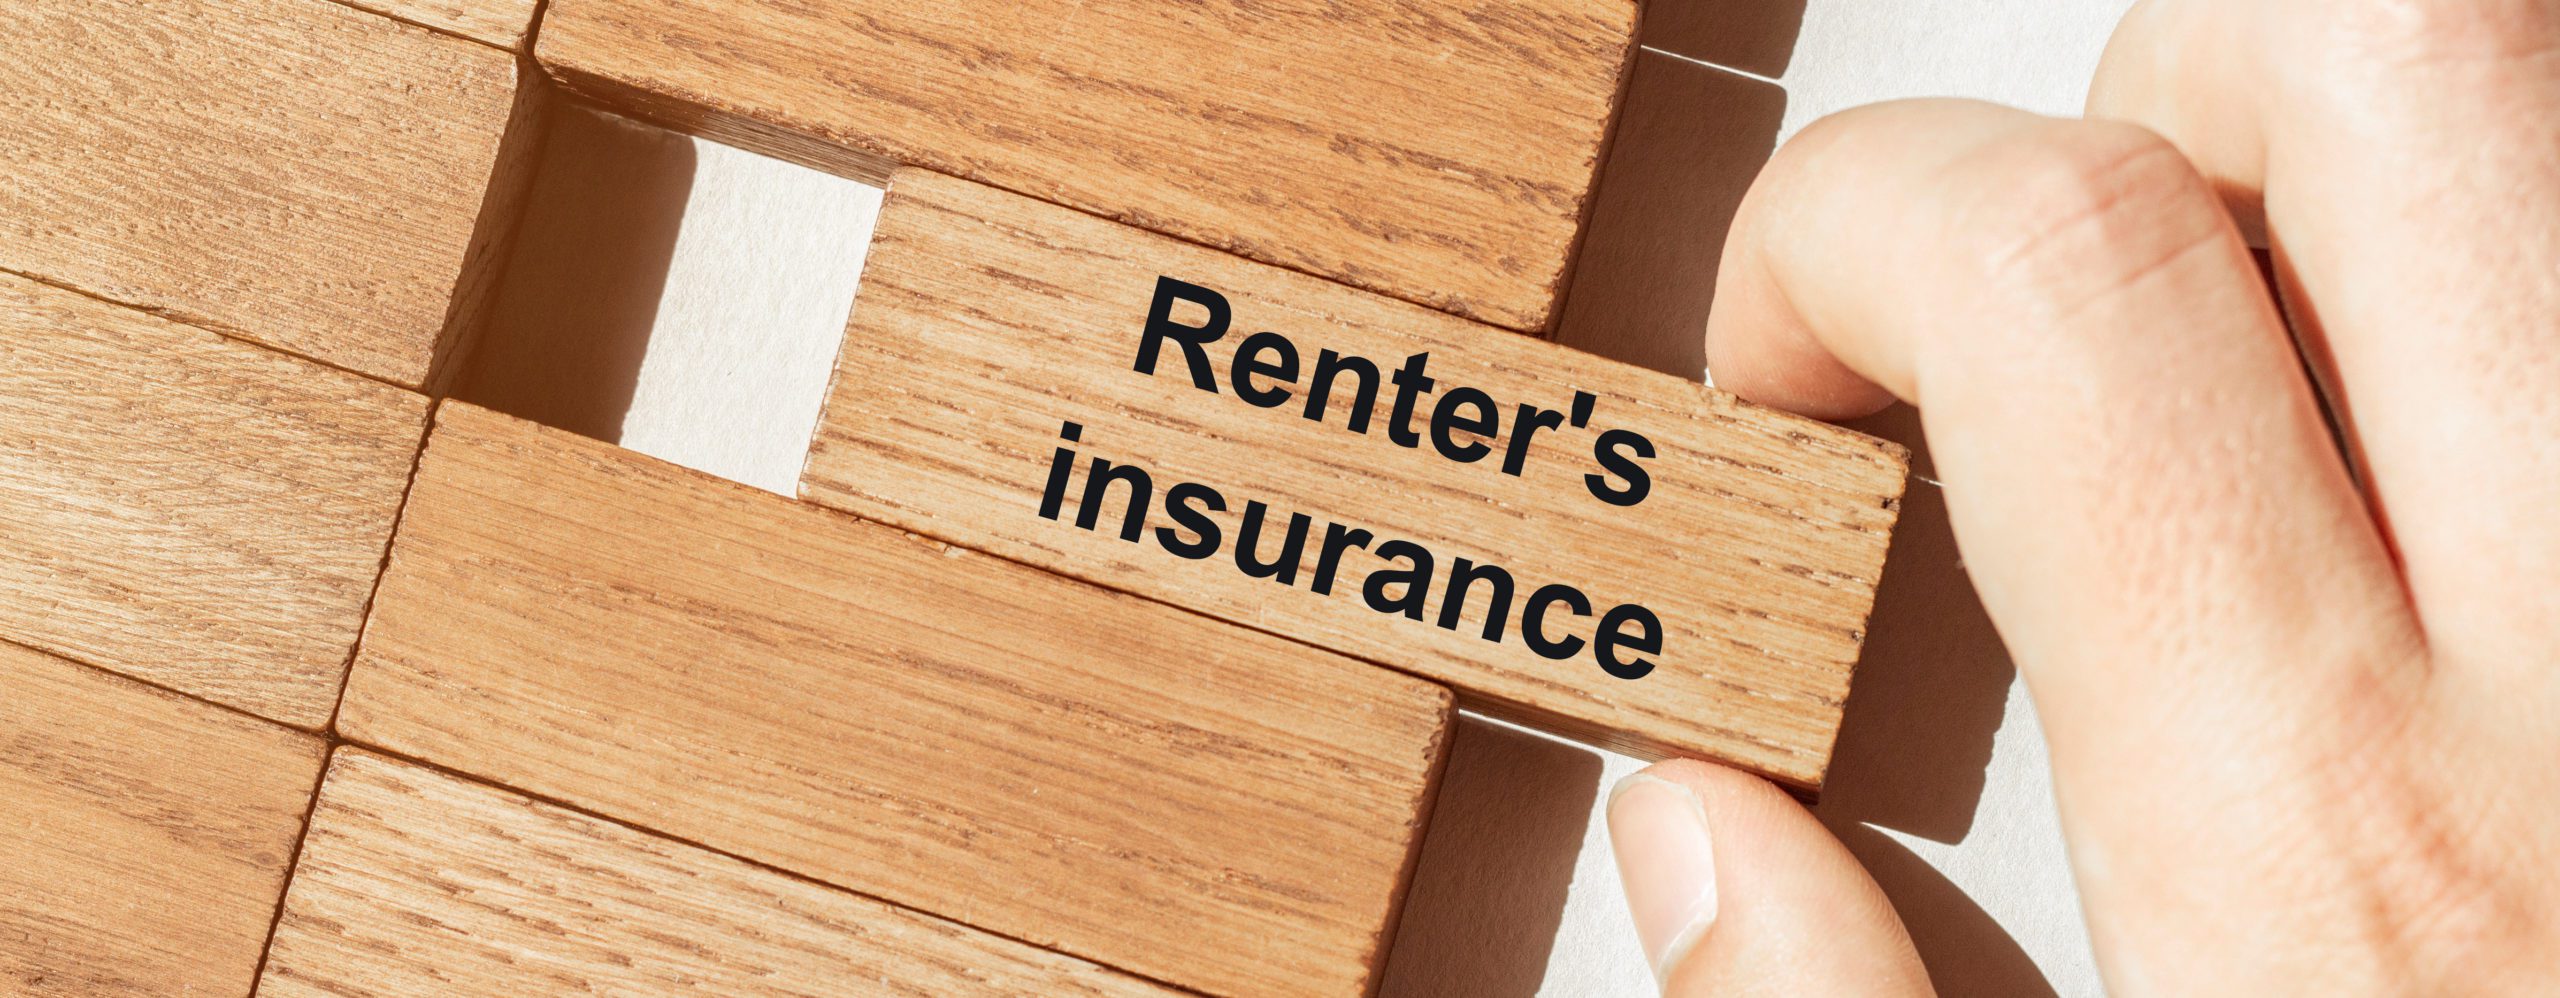 Does Florida Renters Insurance Cover Flooding?